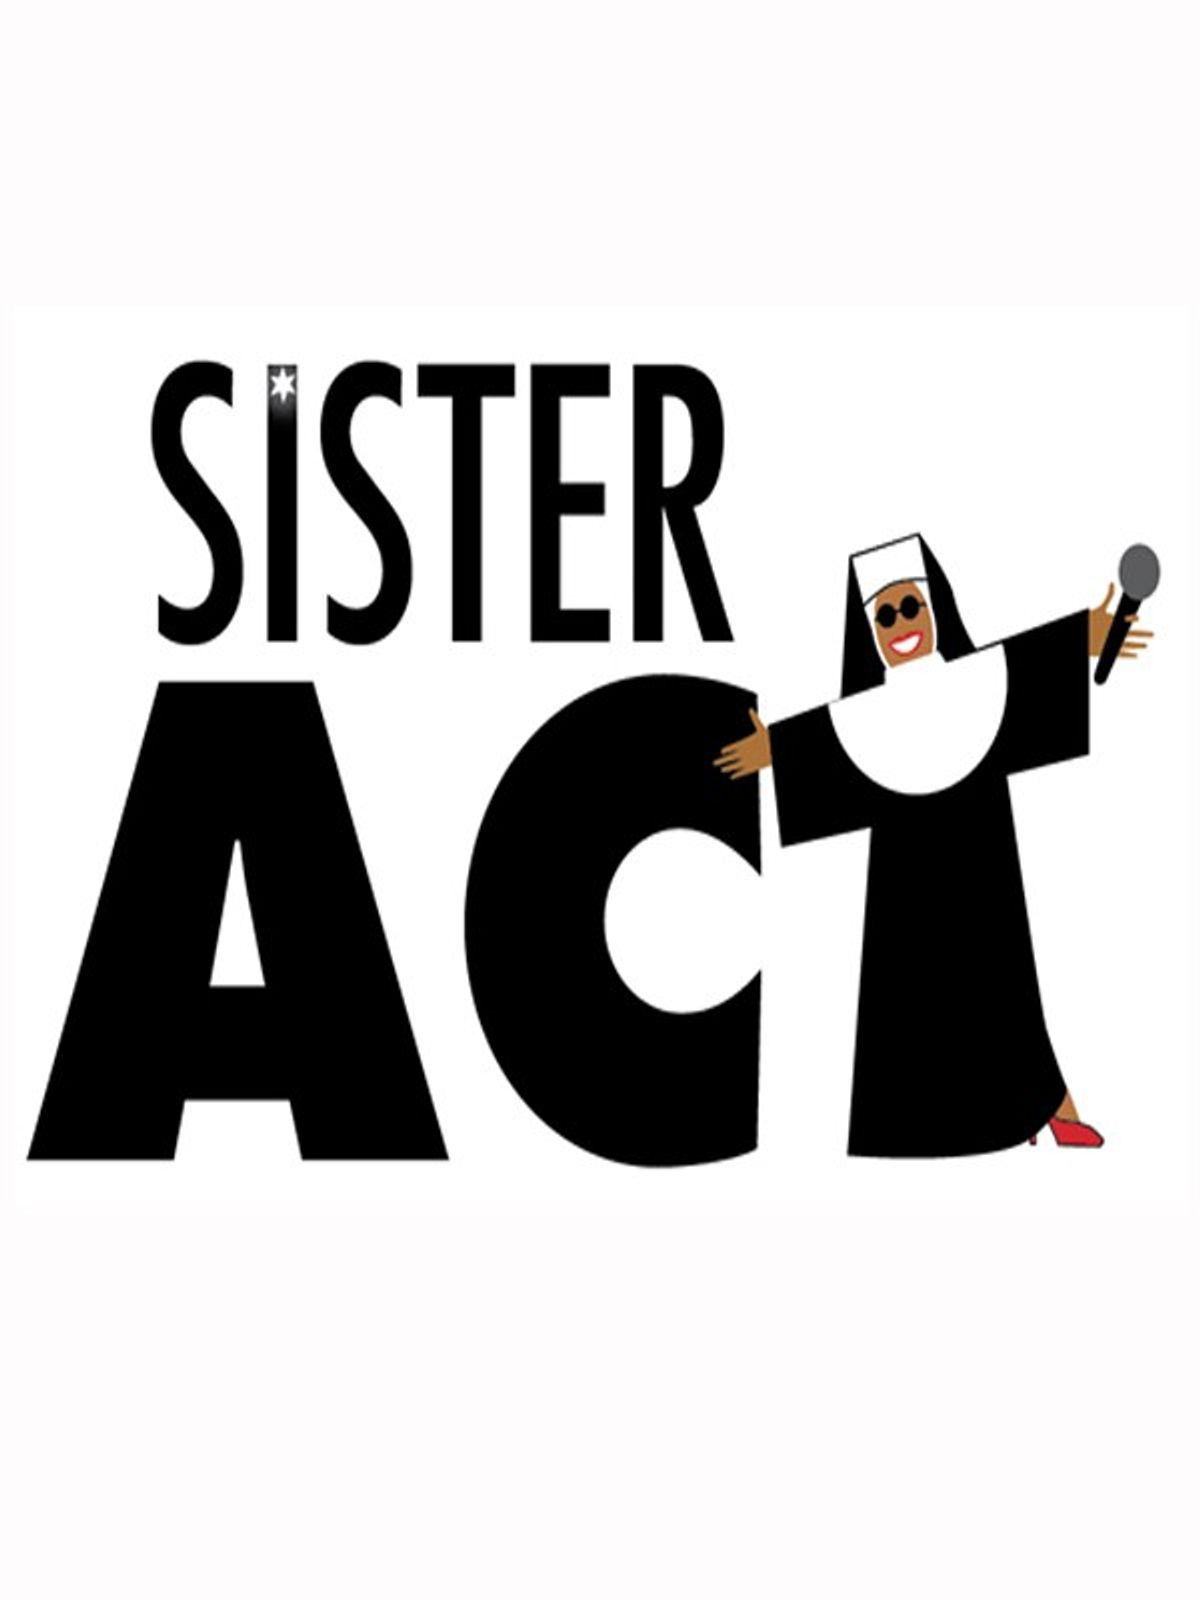 Meet The Nuns: A Glimpse Into CTG's Production Of Sister Act